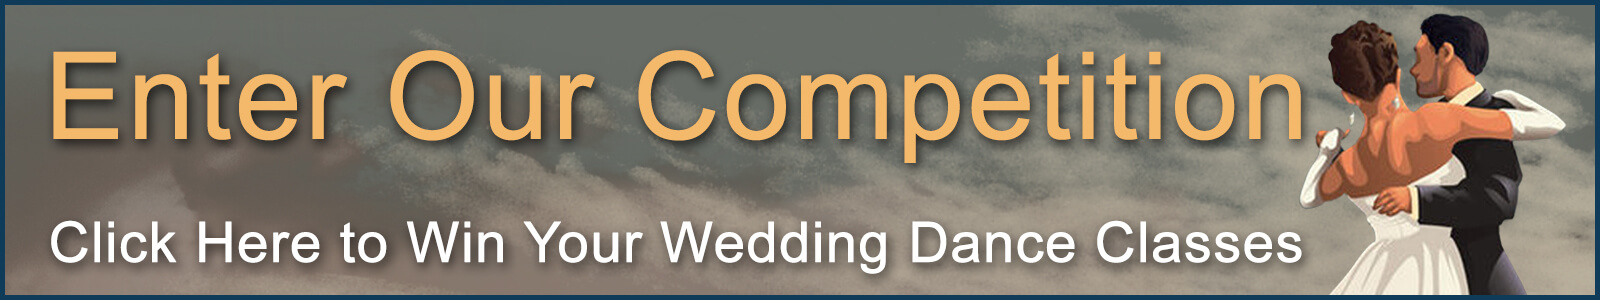 enter our competition and win your wedding dance lessons